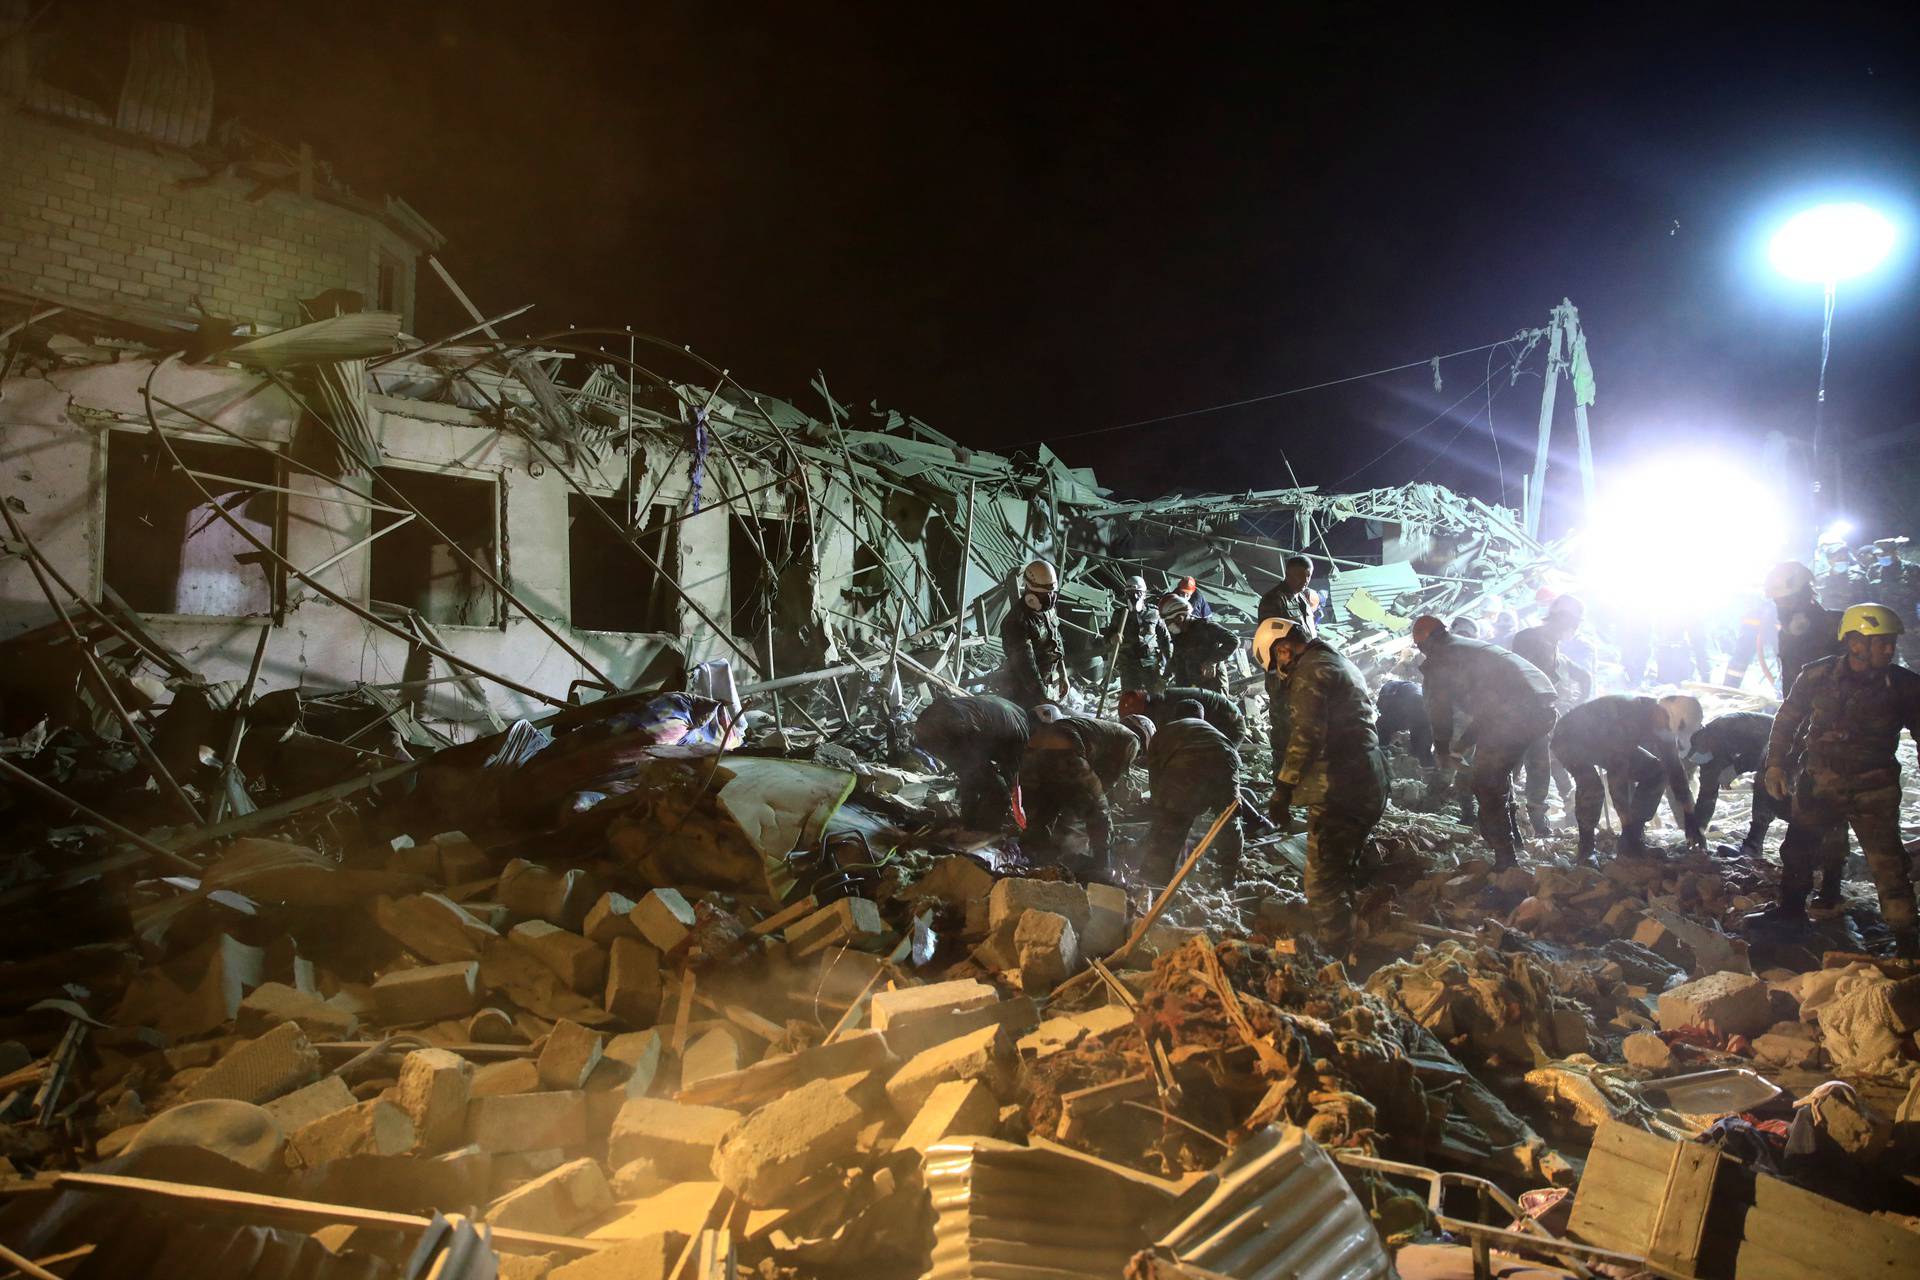 Search and rescue teams work on the blast site hit by a rocket in the city of Ganja